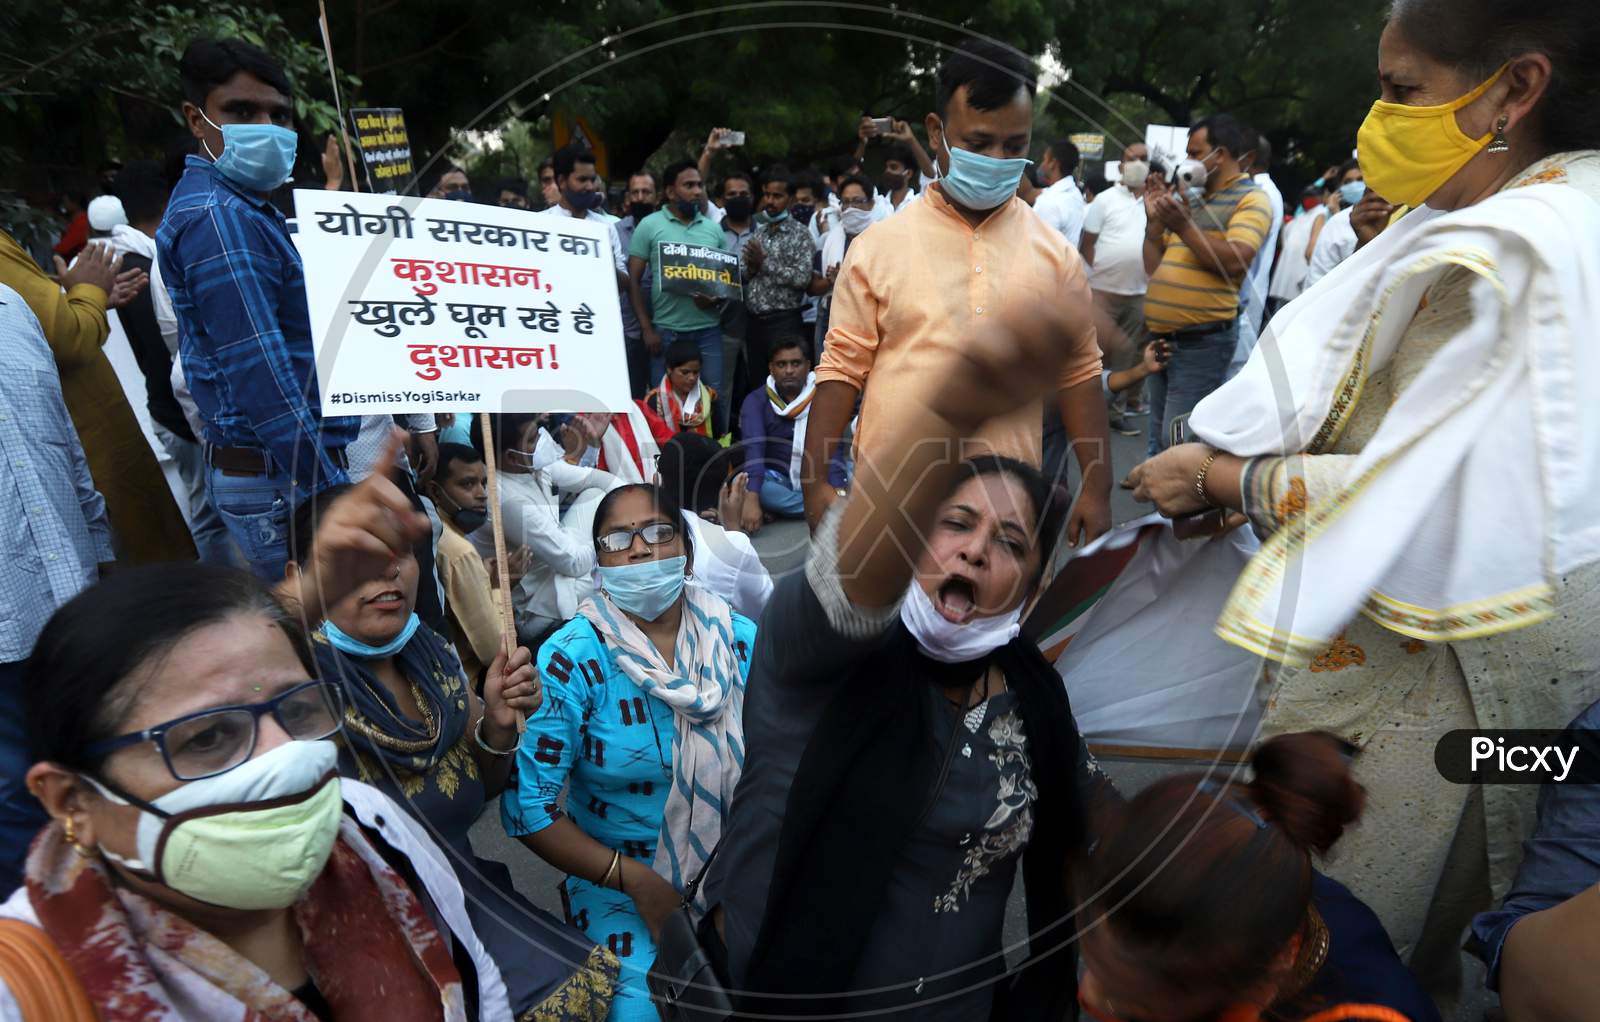 Members of various political bodies protest at the Citizen's protest to demand justice for Hathras victim, at Jantar Mantar, on October 2, 2020 in New Delhi, India.